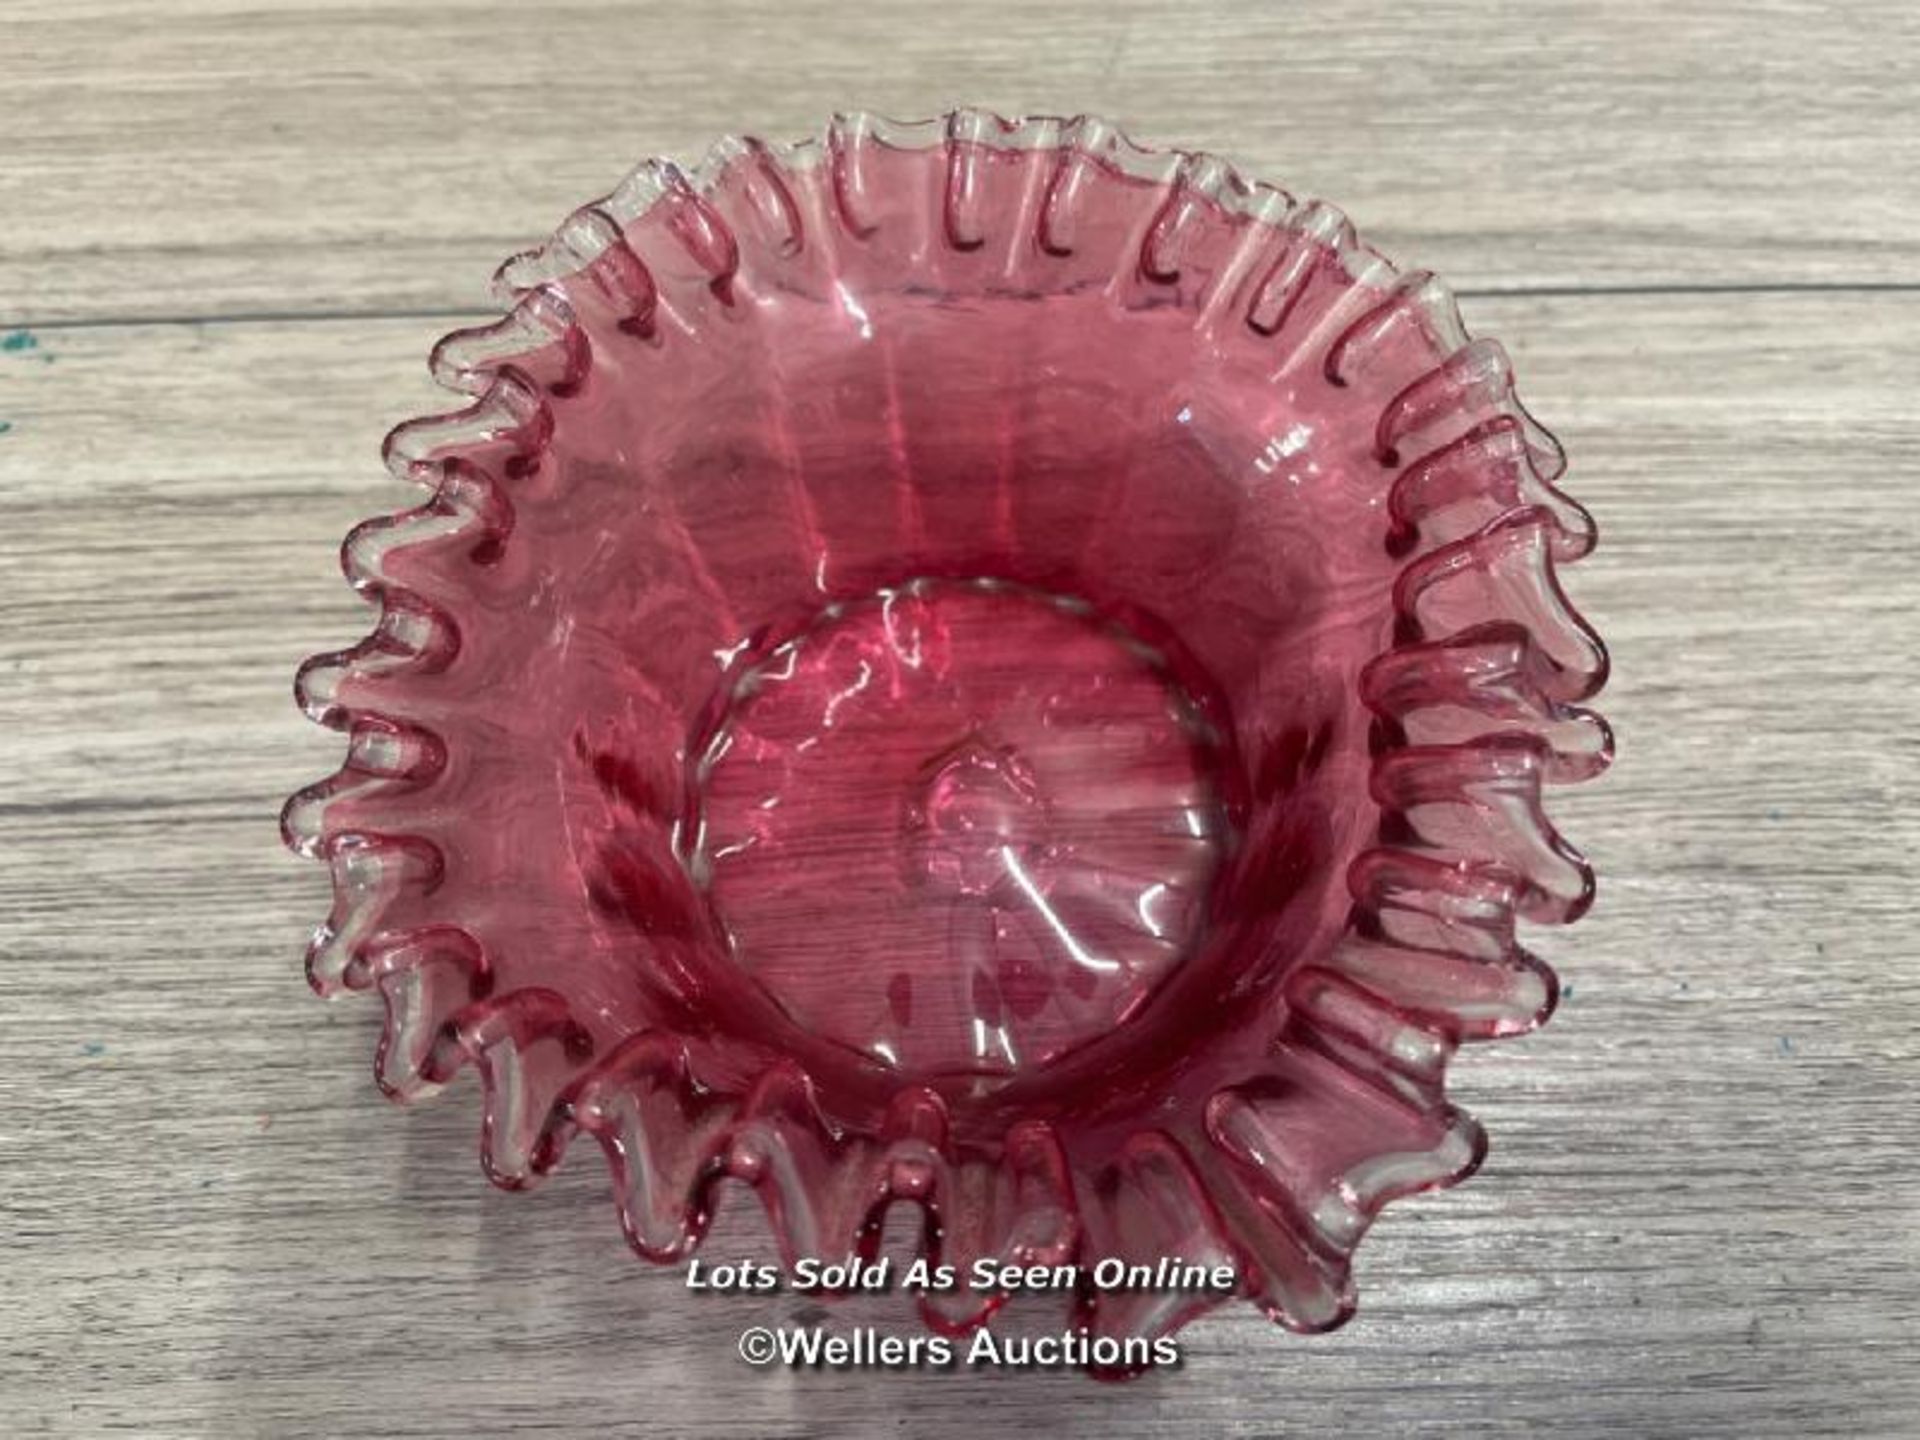 CRANBERRY GLASS BOWL WITH FRILLED EDGE, 13CM DIAMETER - Image 2 of 3